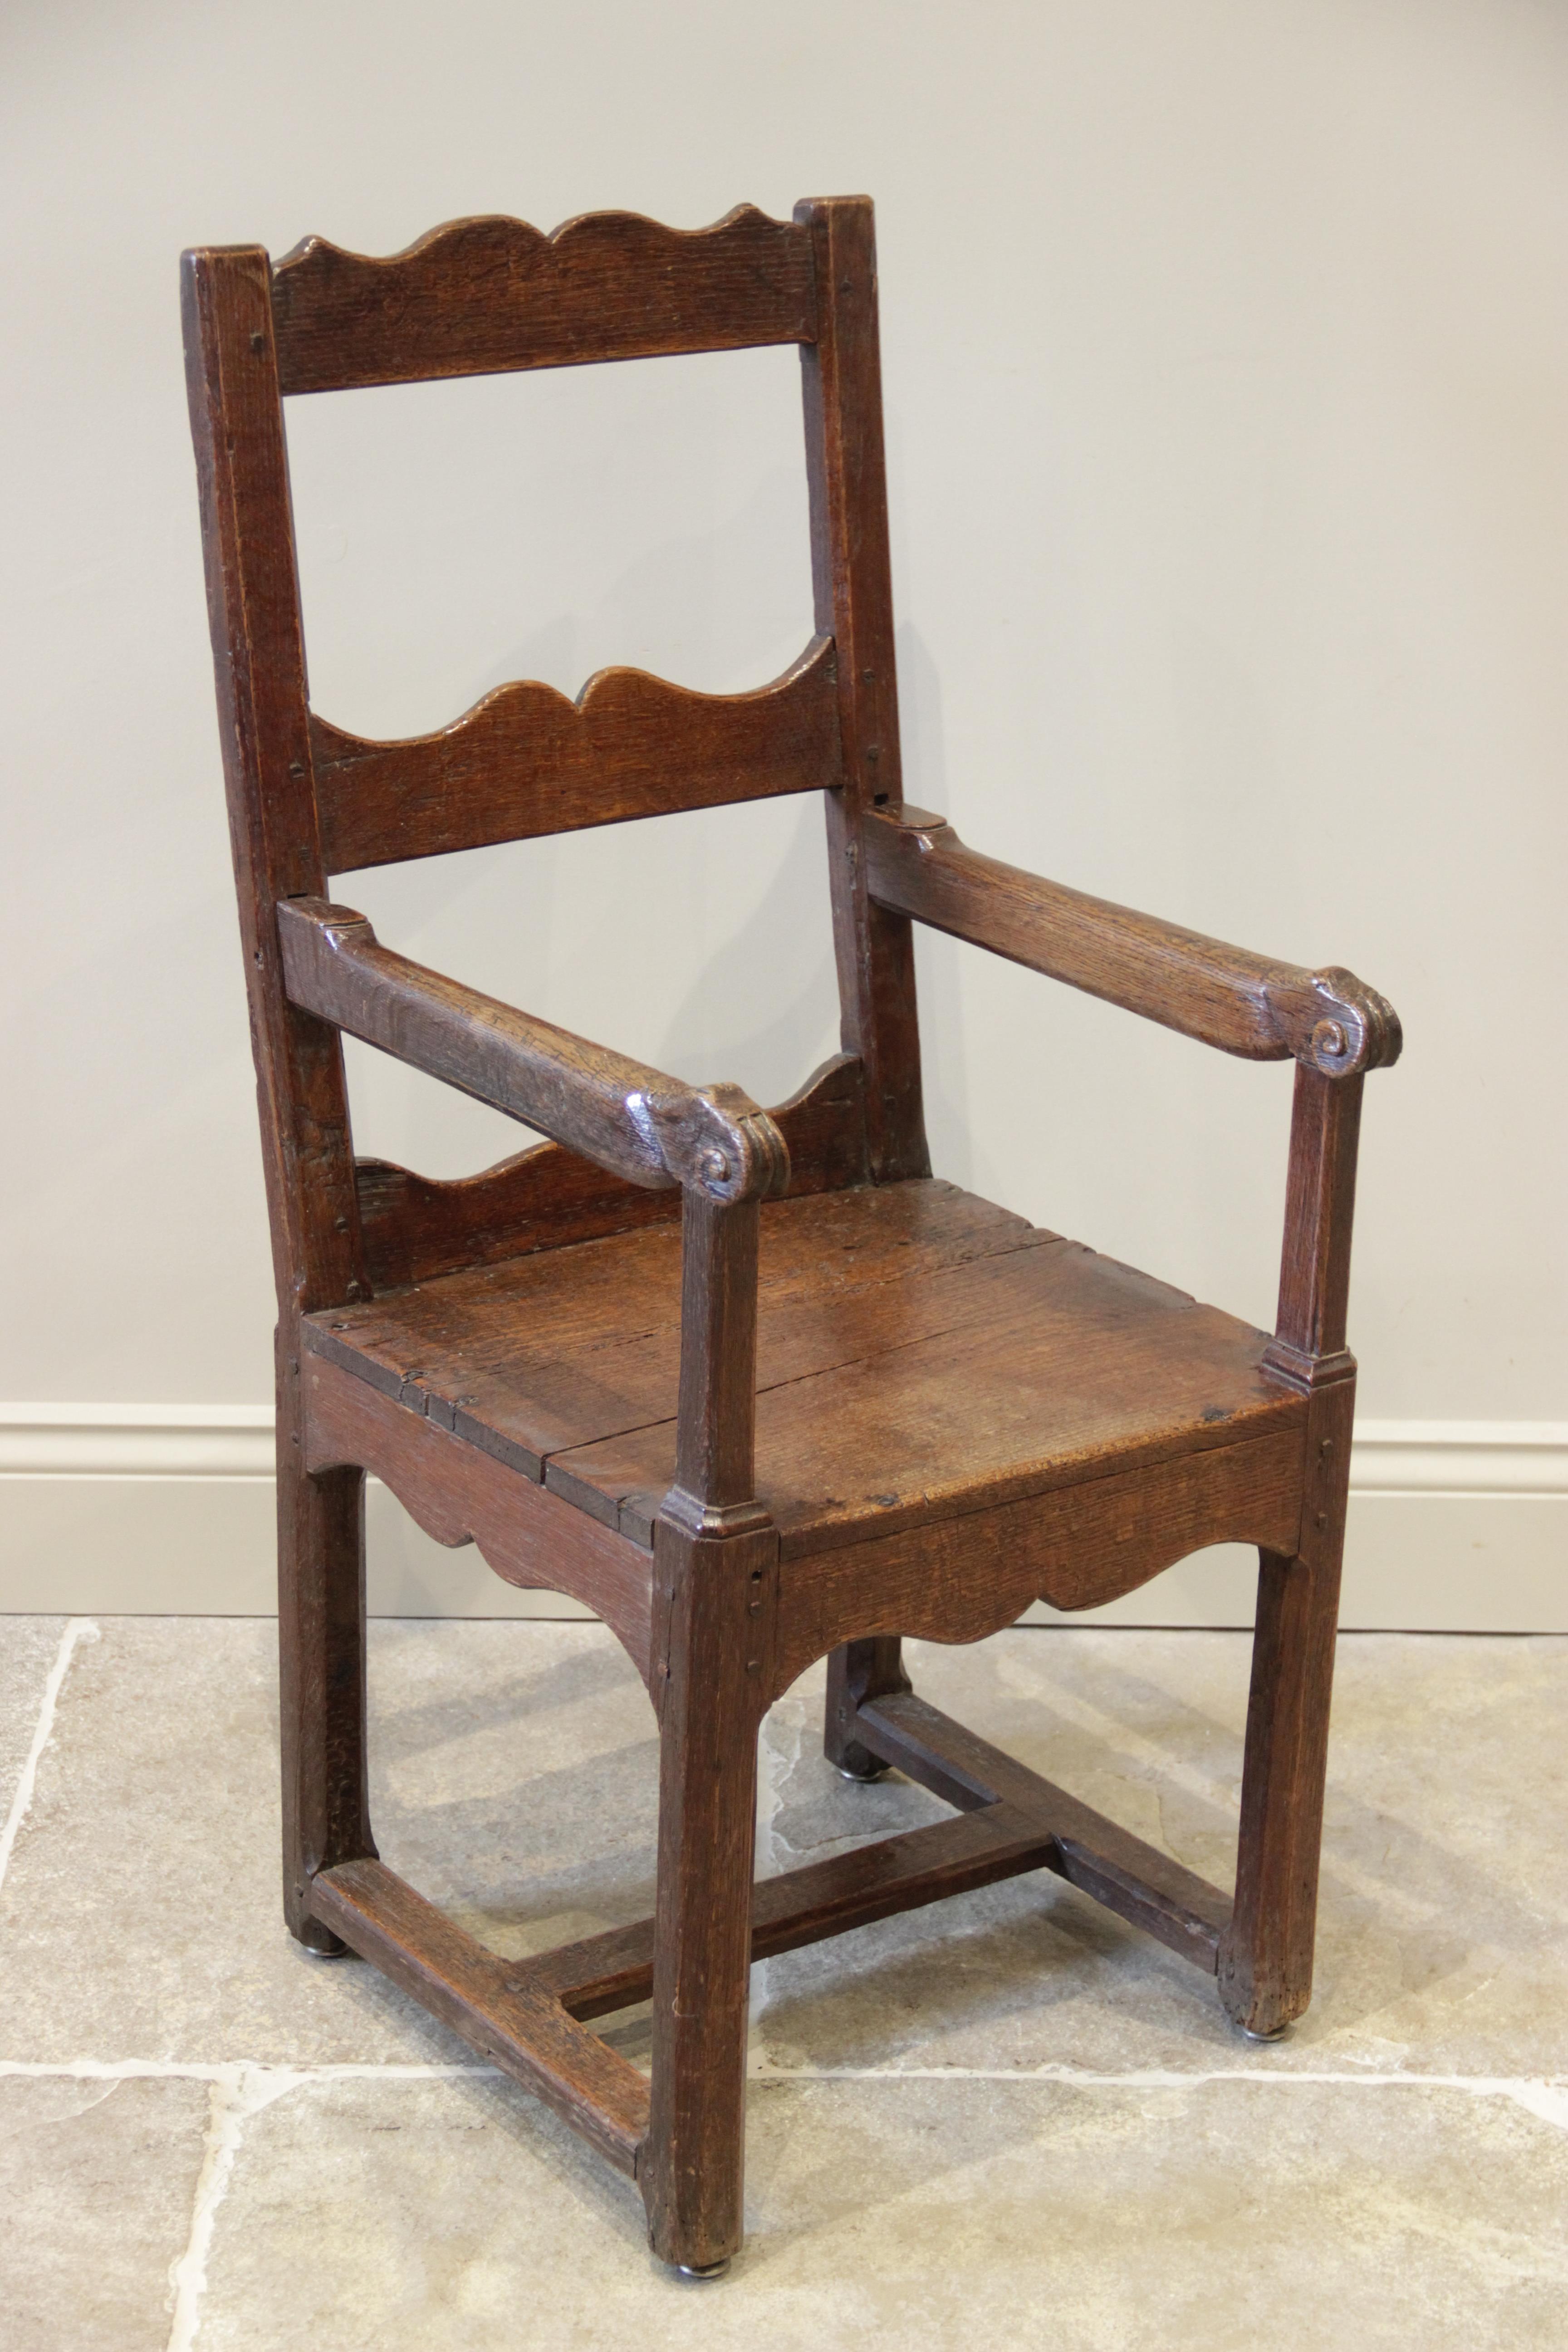 A 16th century jointed oak armchair, the two wavy back rails supported on chamfered supports